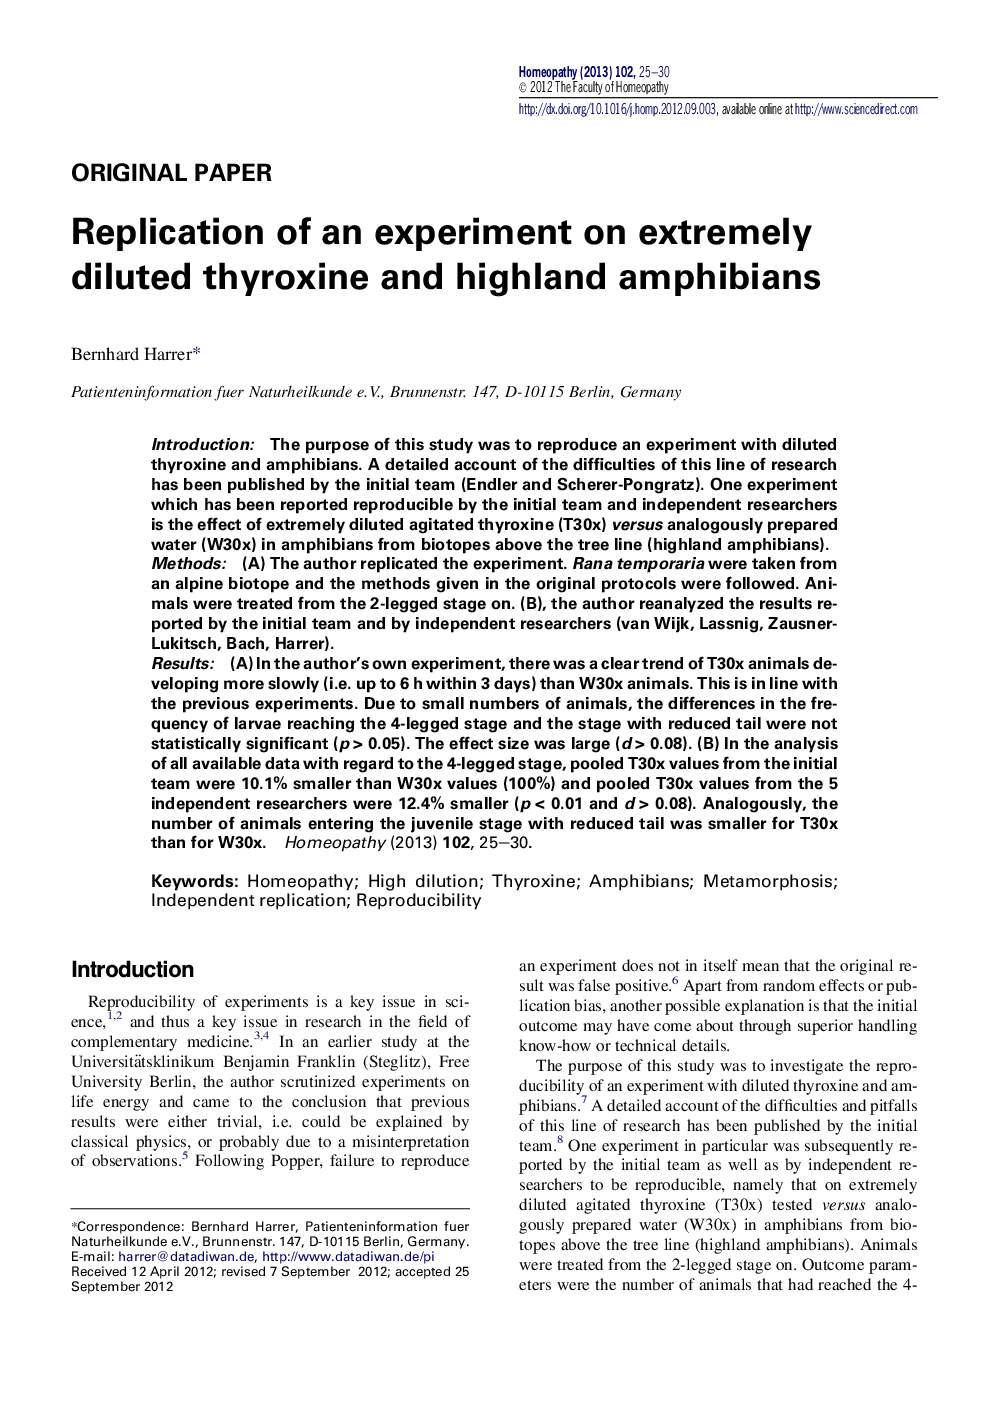 Replication of an experiment on extremely diluted thyroxine and highland amphibians